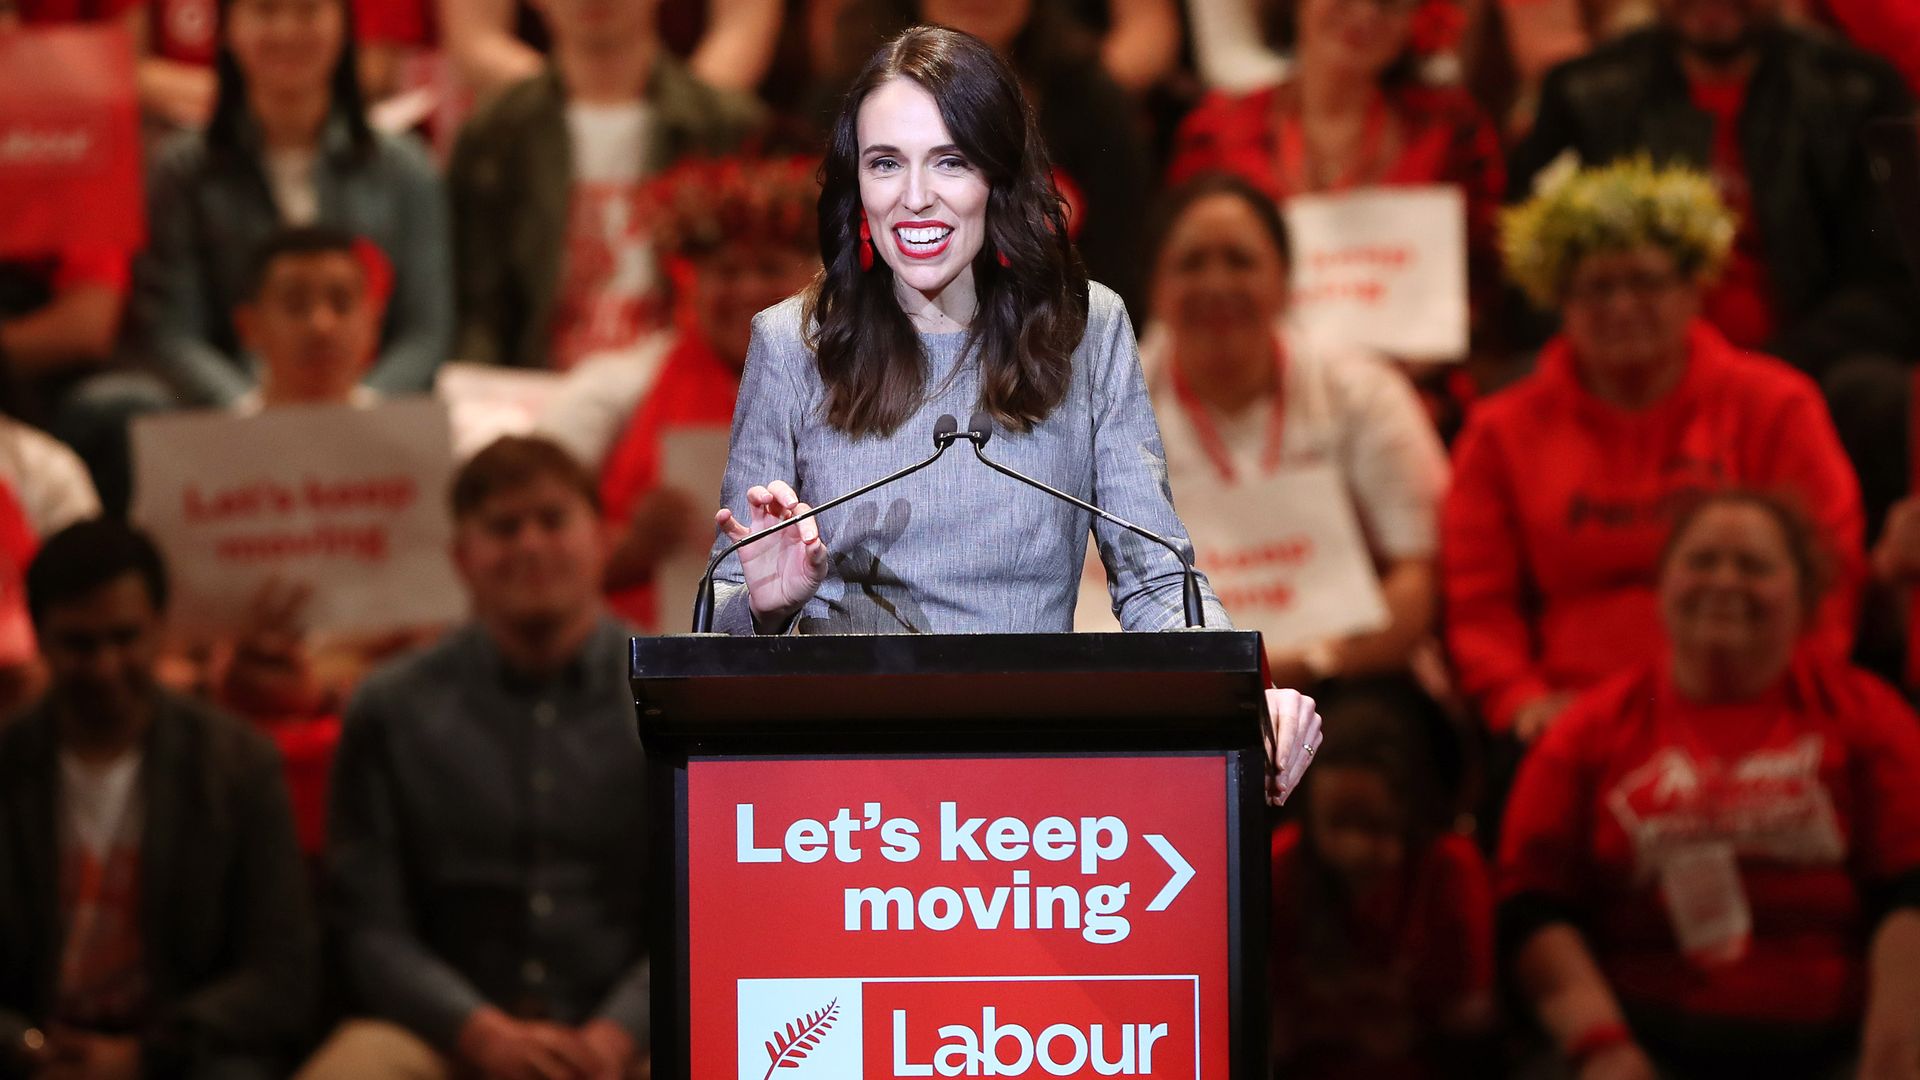 New Zealand's Prime Minister Jacinda Ardern attends the launch of the Labour Party's election campaign in Auckland on August 8